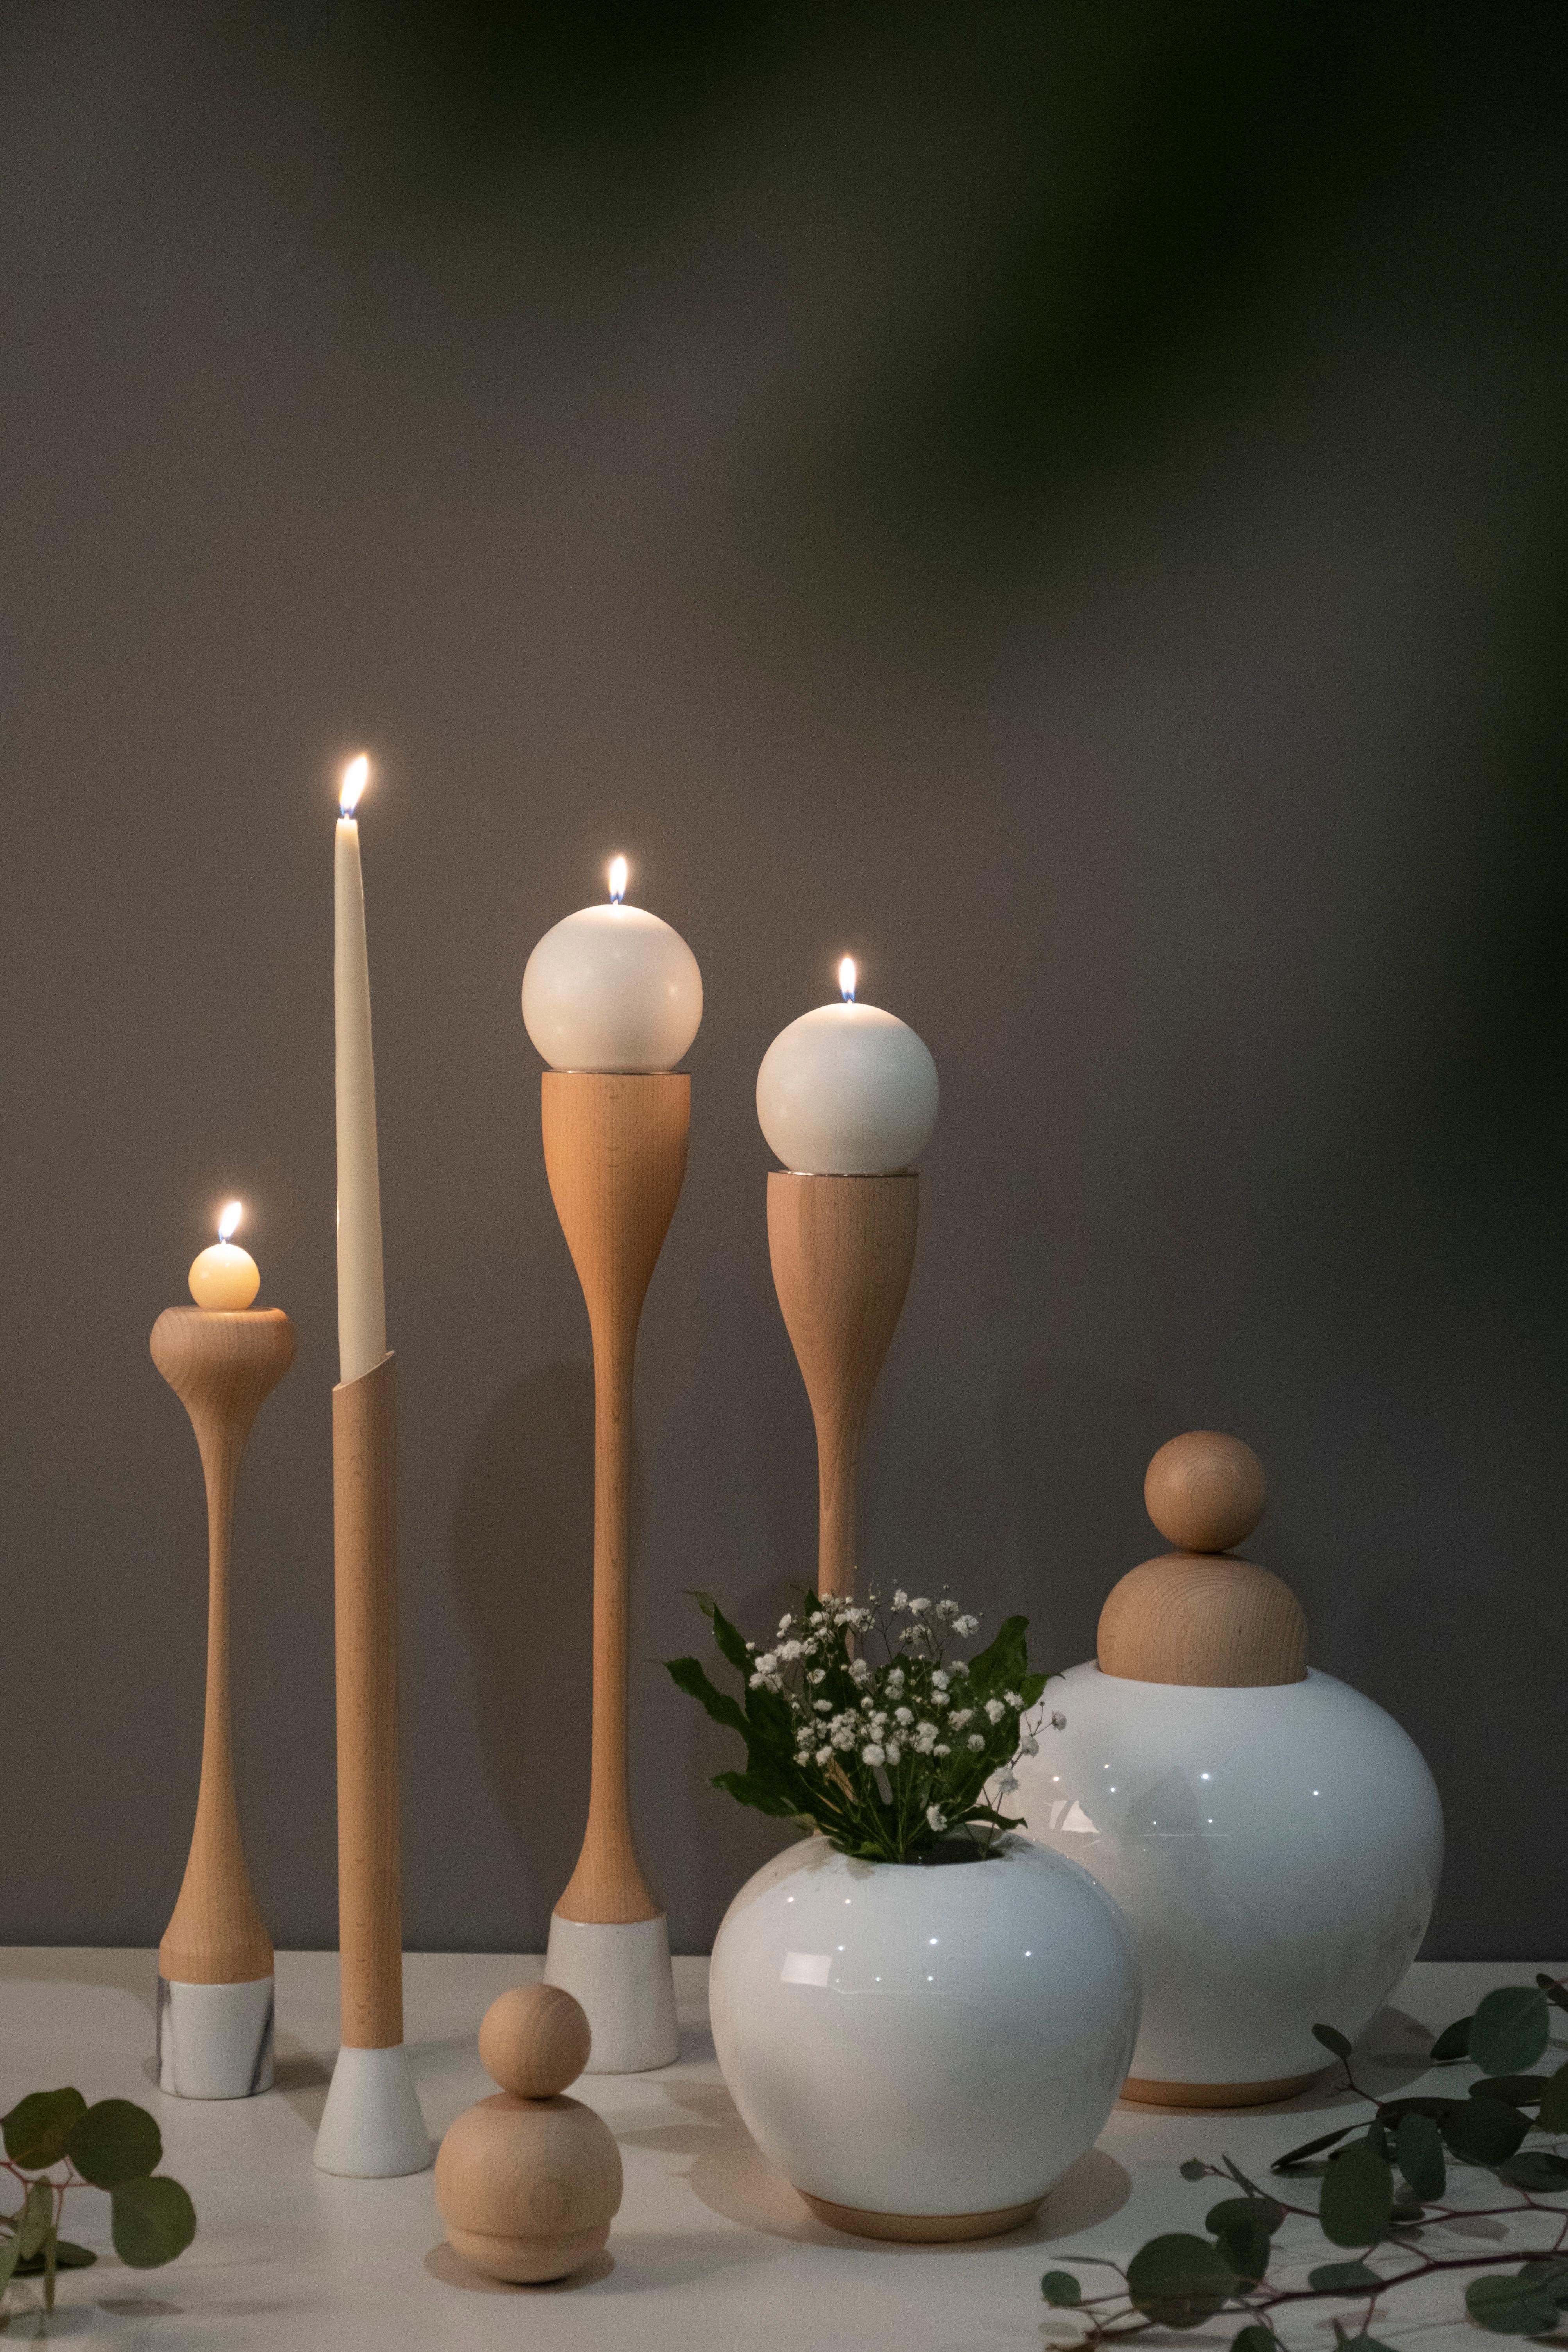 Castor, Heitor, Perseu Candle Holders & Salman Pots, Lusitanus Home Collection, Handcrafted in Portugal - Europe by Lusitanus Home.

This beautiful set includes four ceramic candle holders and two pots, perfect to be displayed together in endless